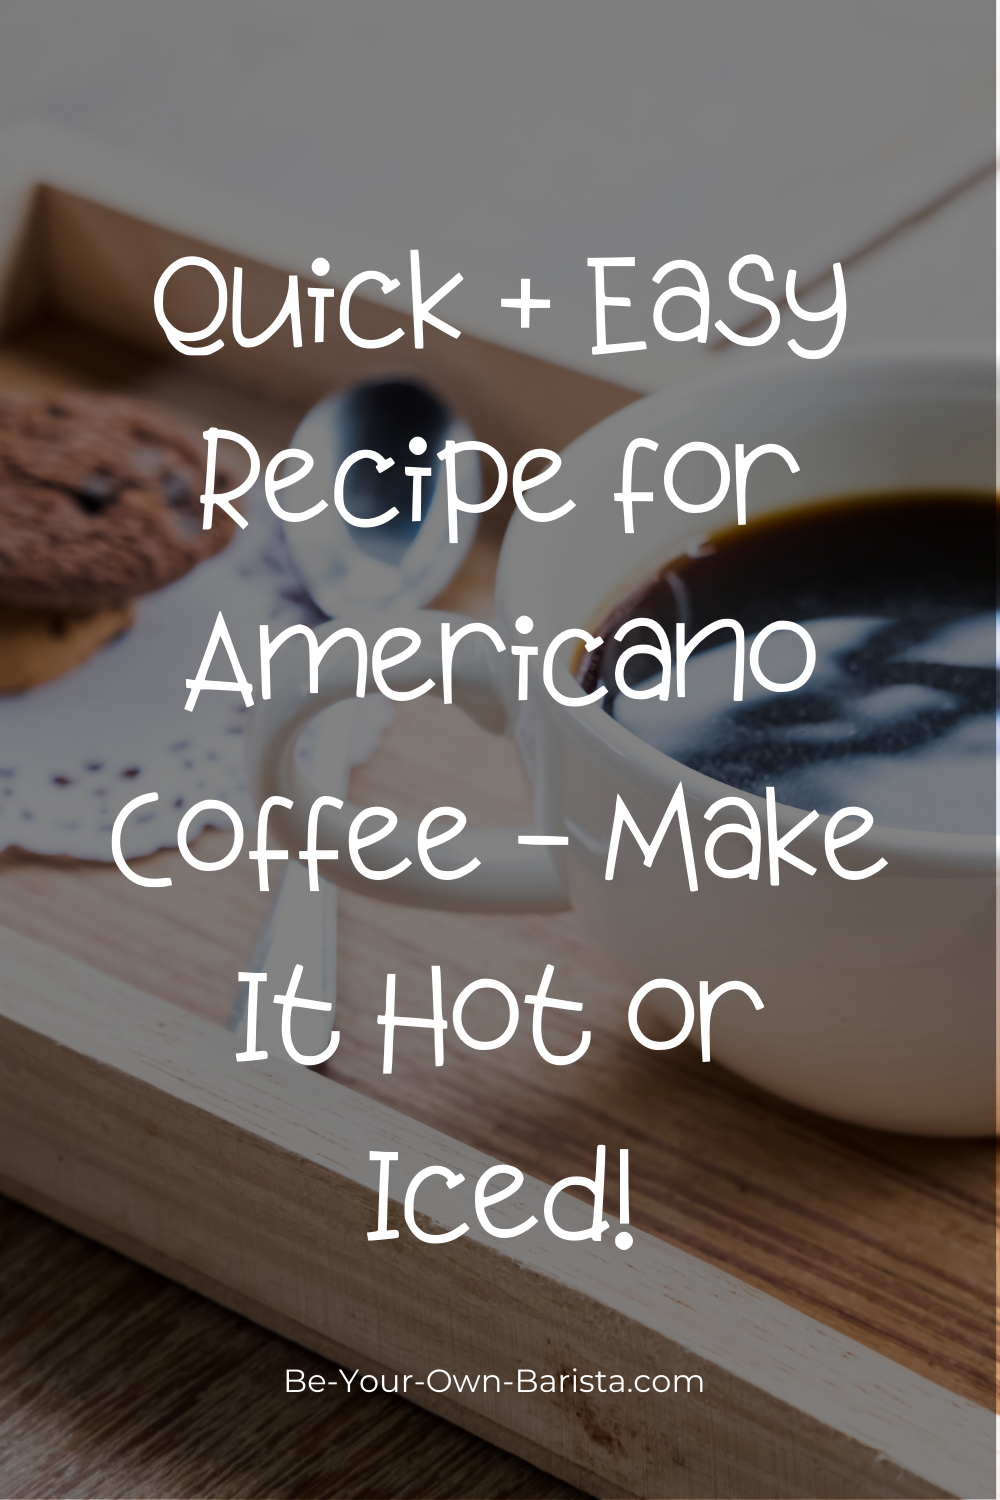 Easy Recipe for Americano Coffee (Hot or Iced + Fun Variations)